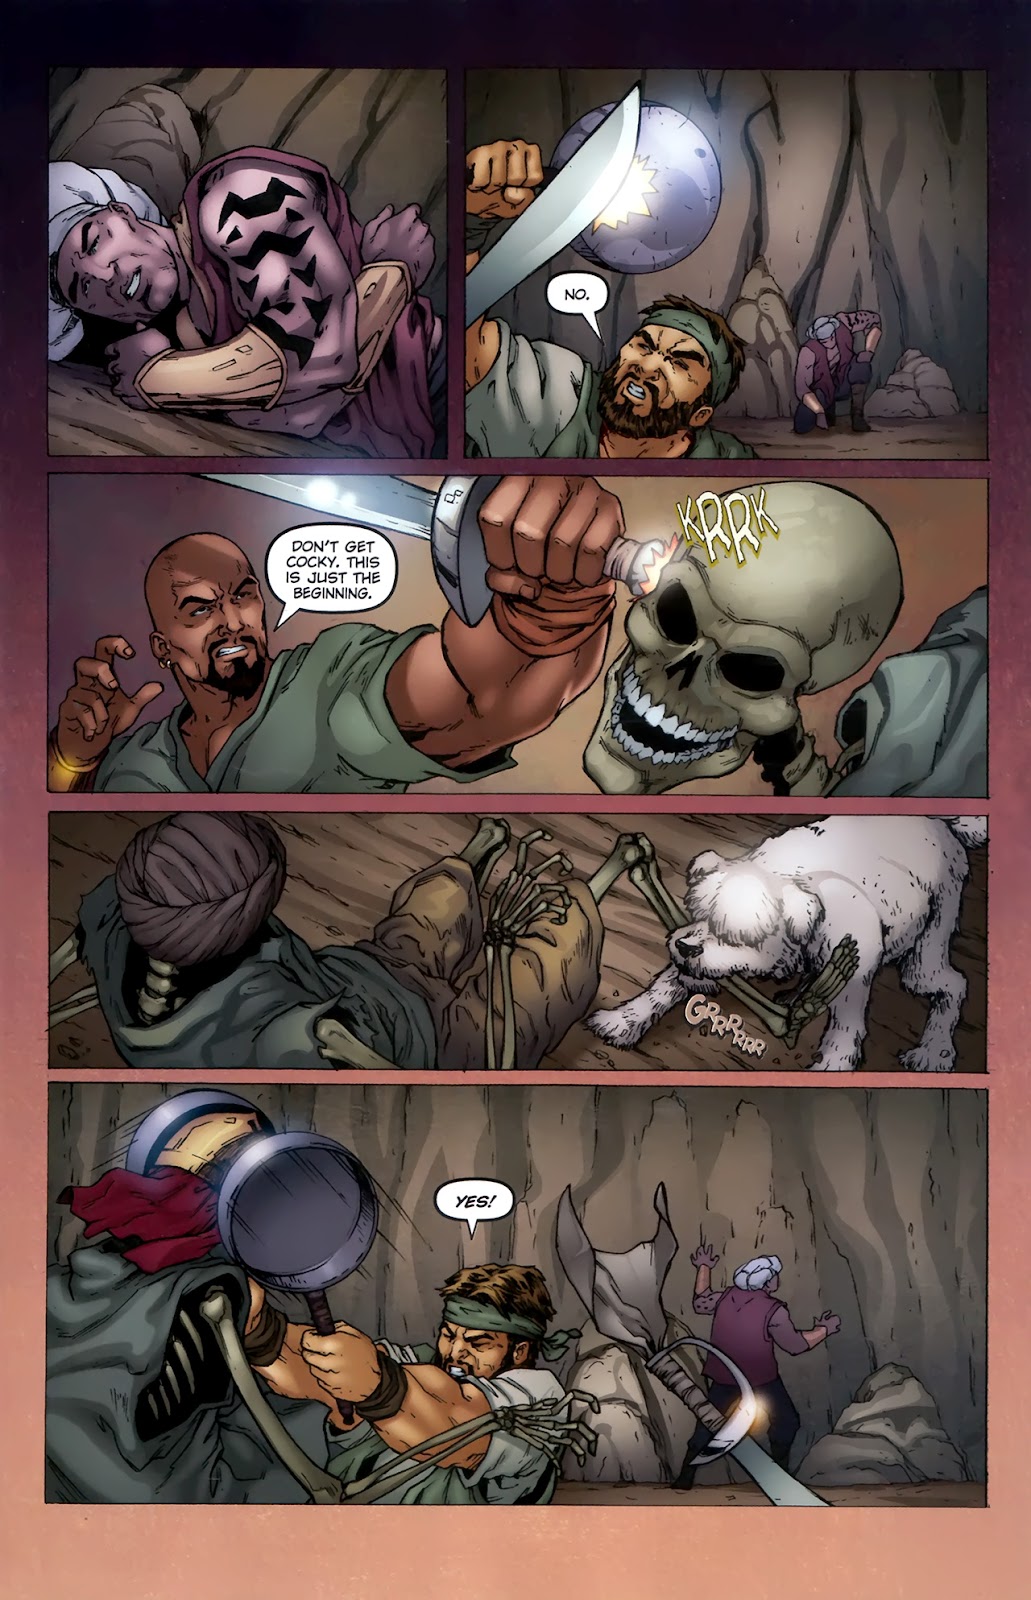 1001 Arabian Nights: The Adventures of Sinbad issue 11 - Page 13